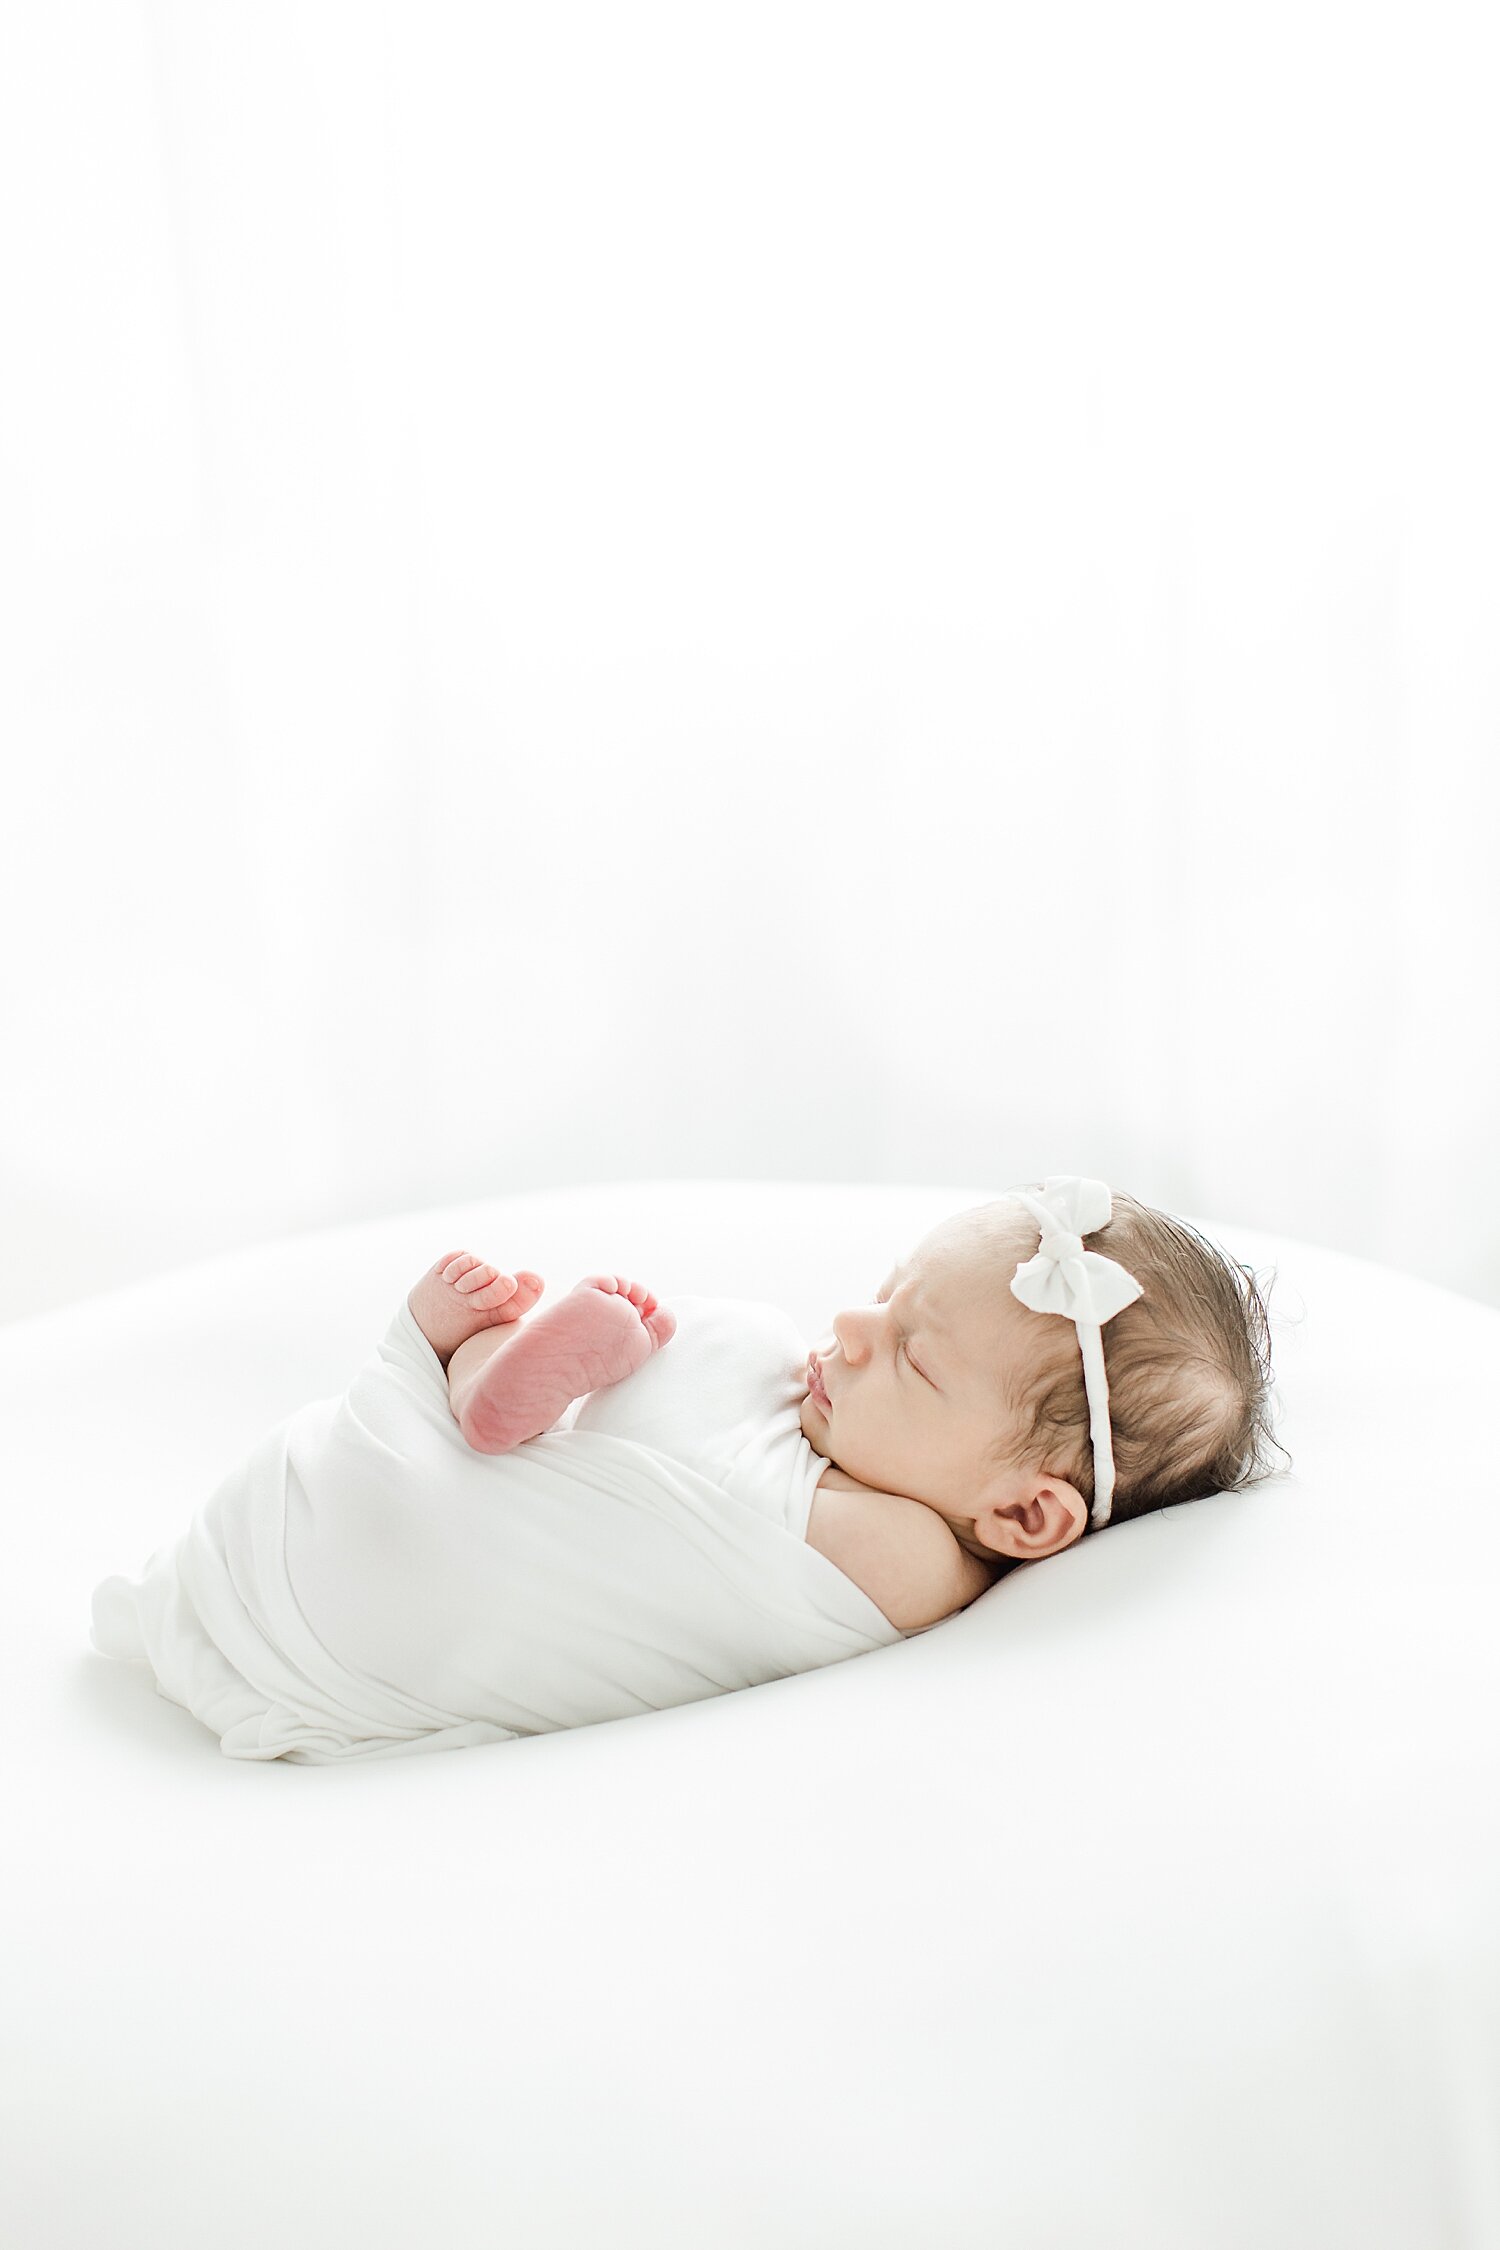 Classic newborn portrait in all white with Kristin Wood Photography in Westport, CT.